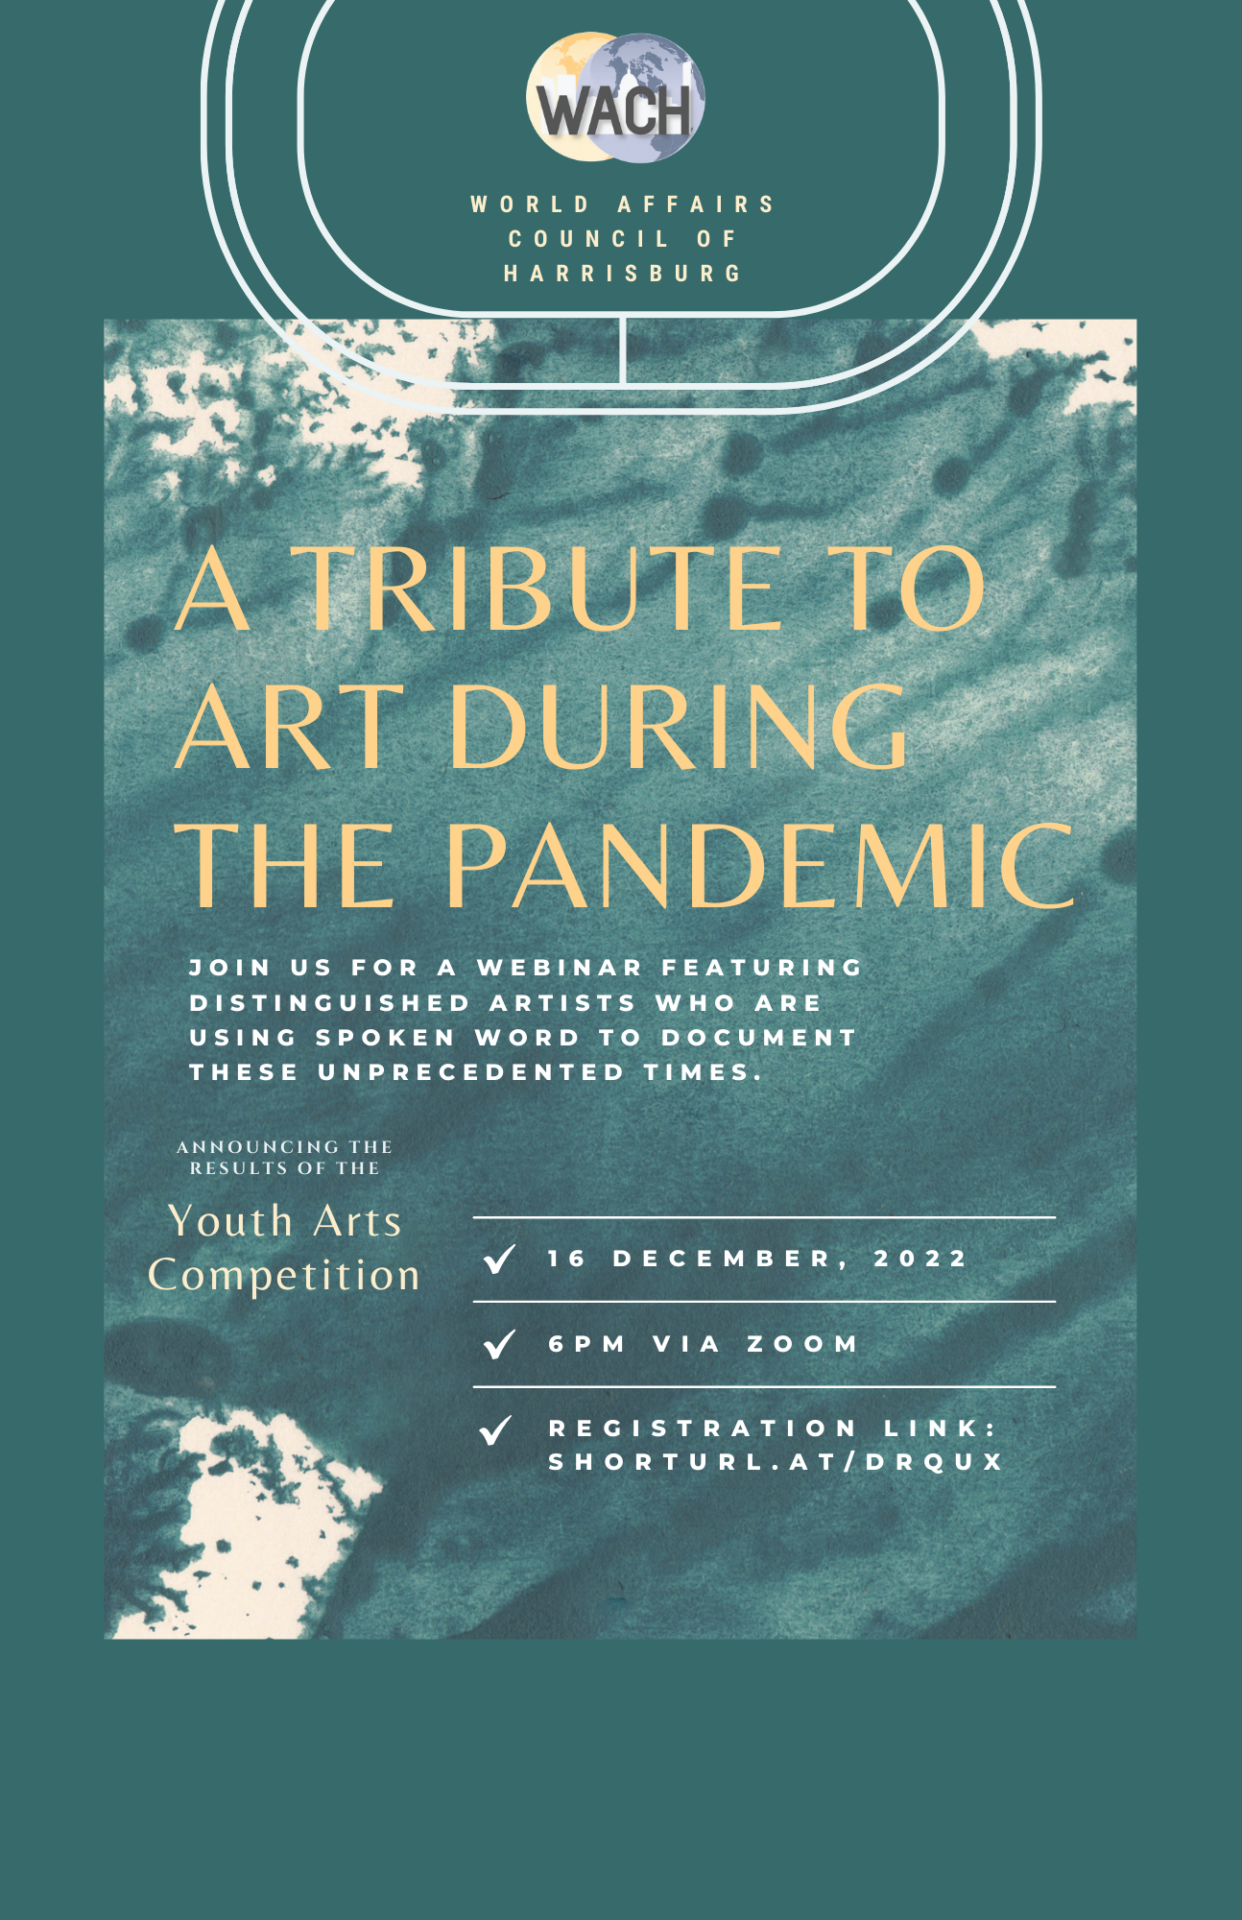 “A Tribute to the Arts during the Pandemic”